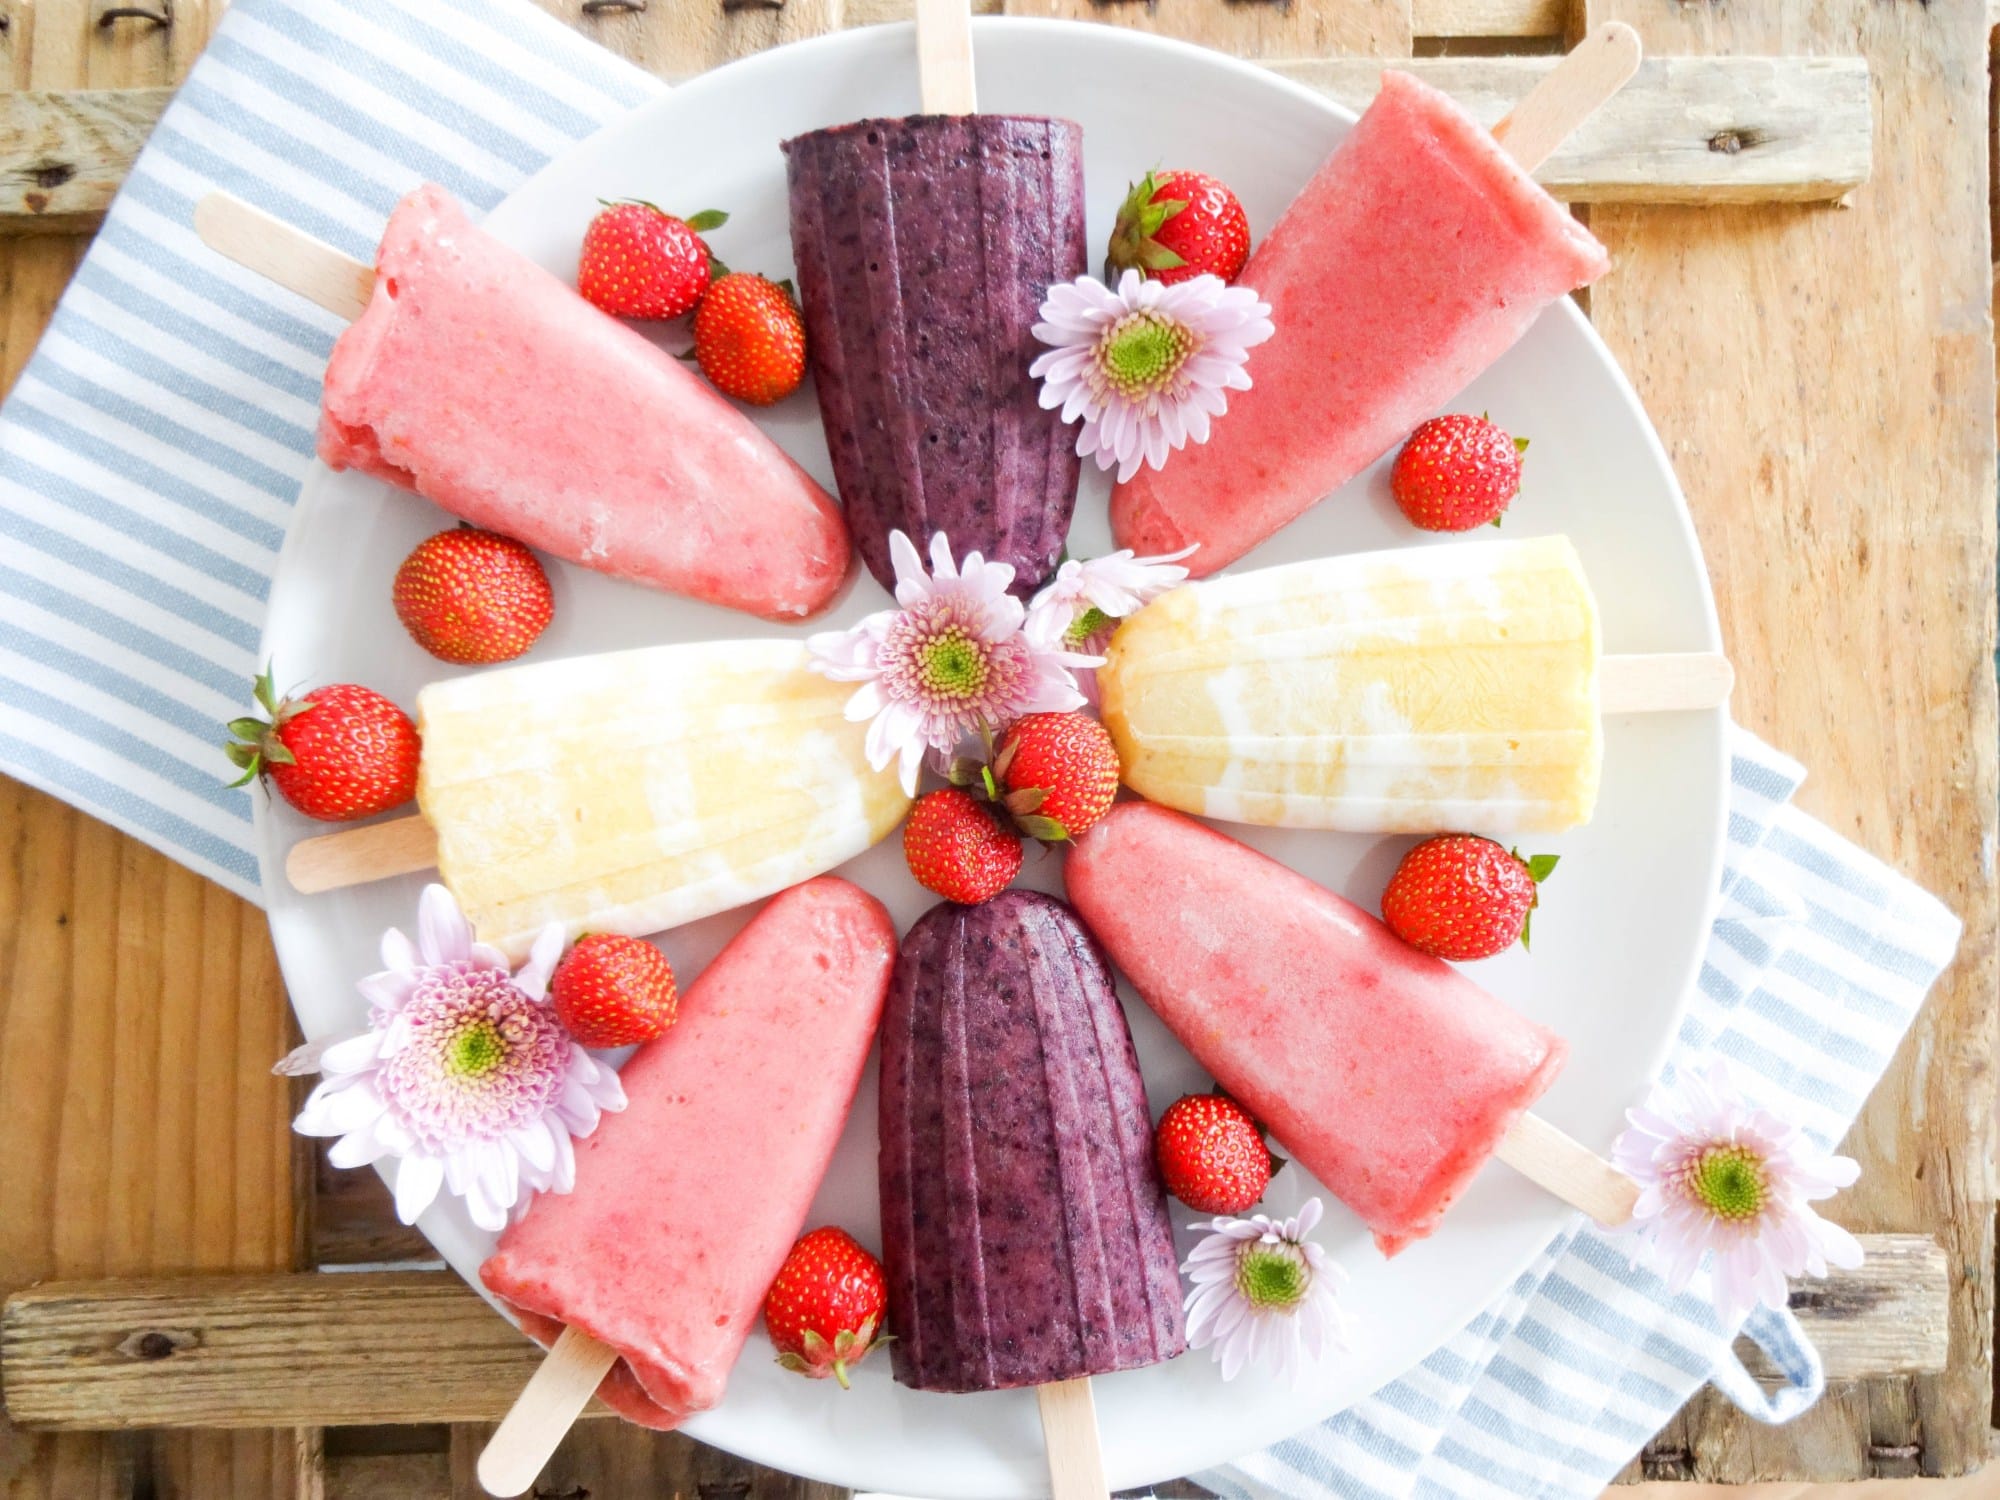 Homemade popsicles in different flavors and colors on white plate